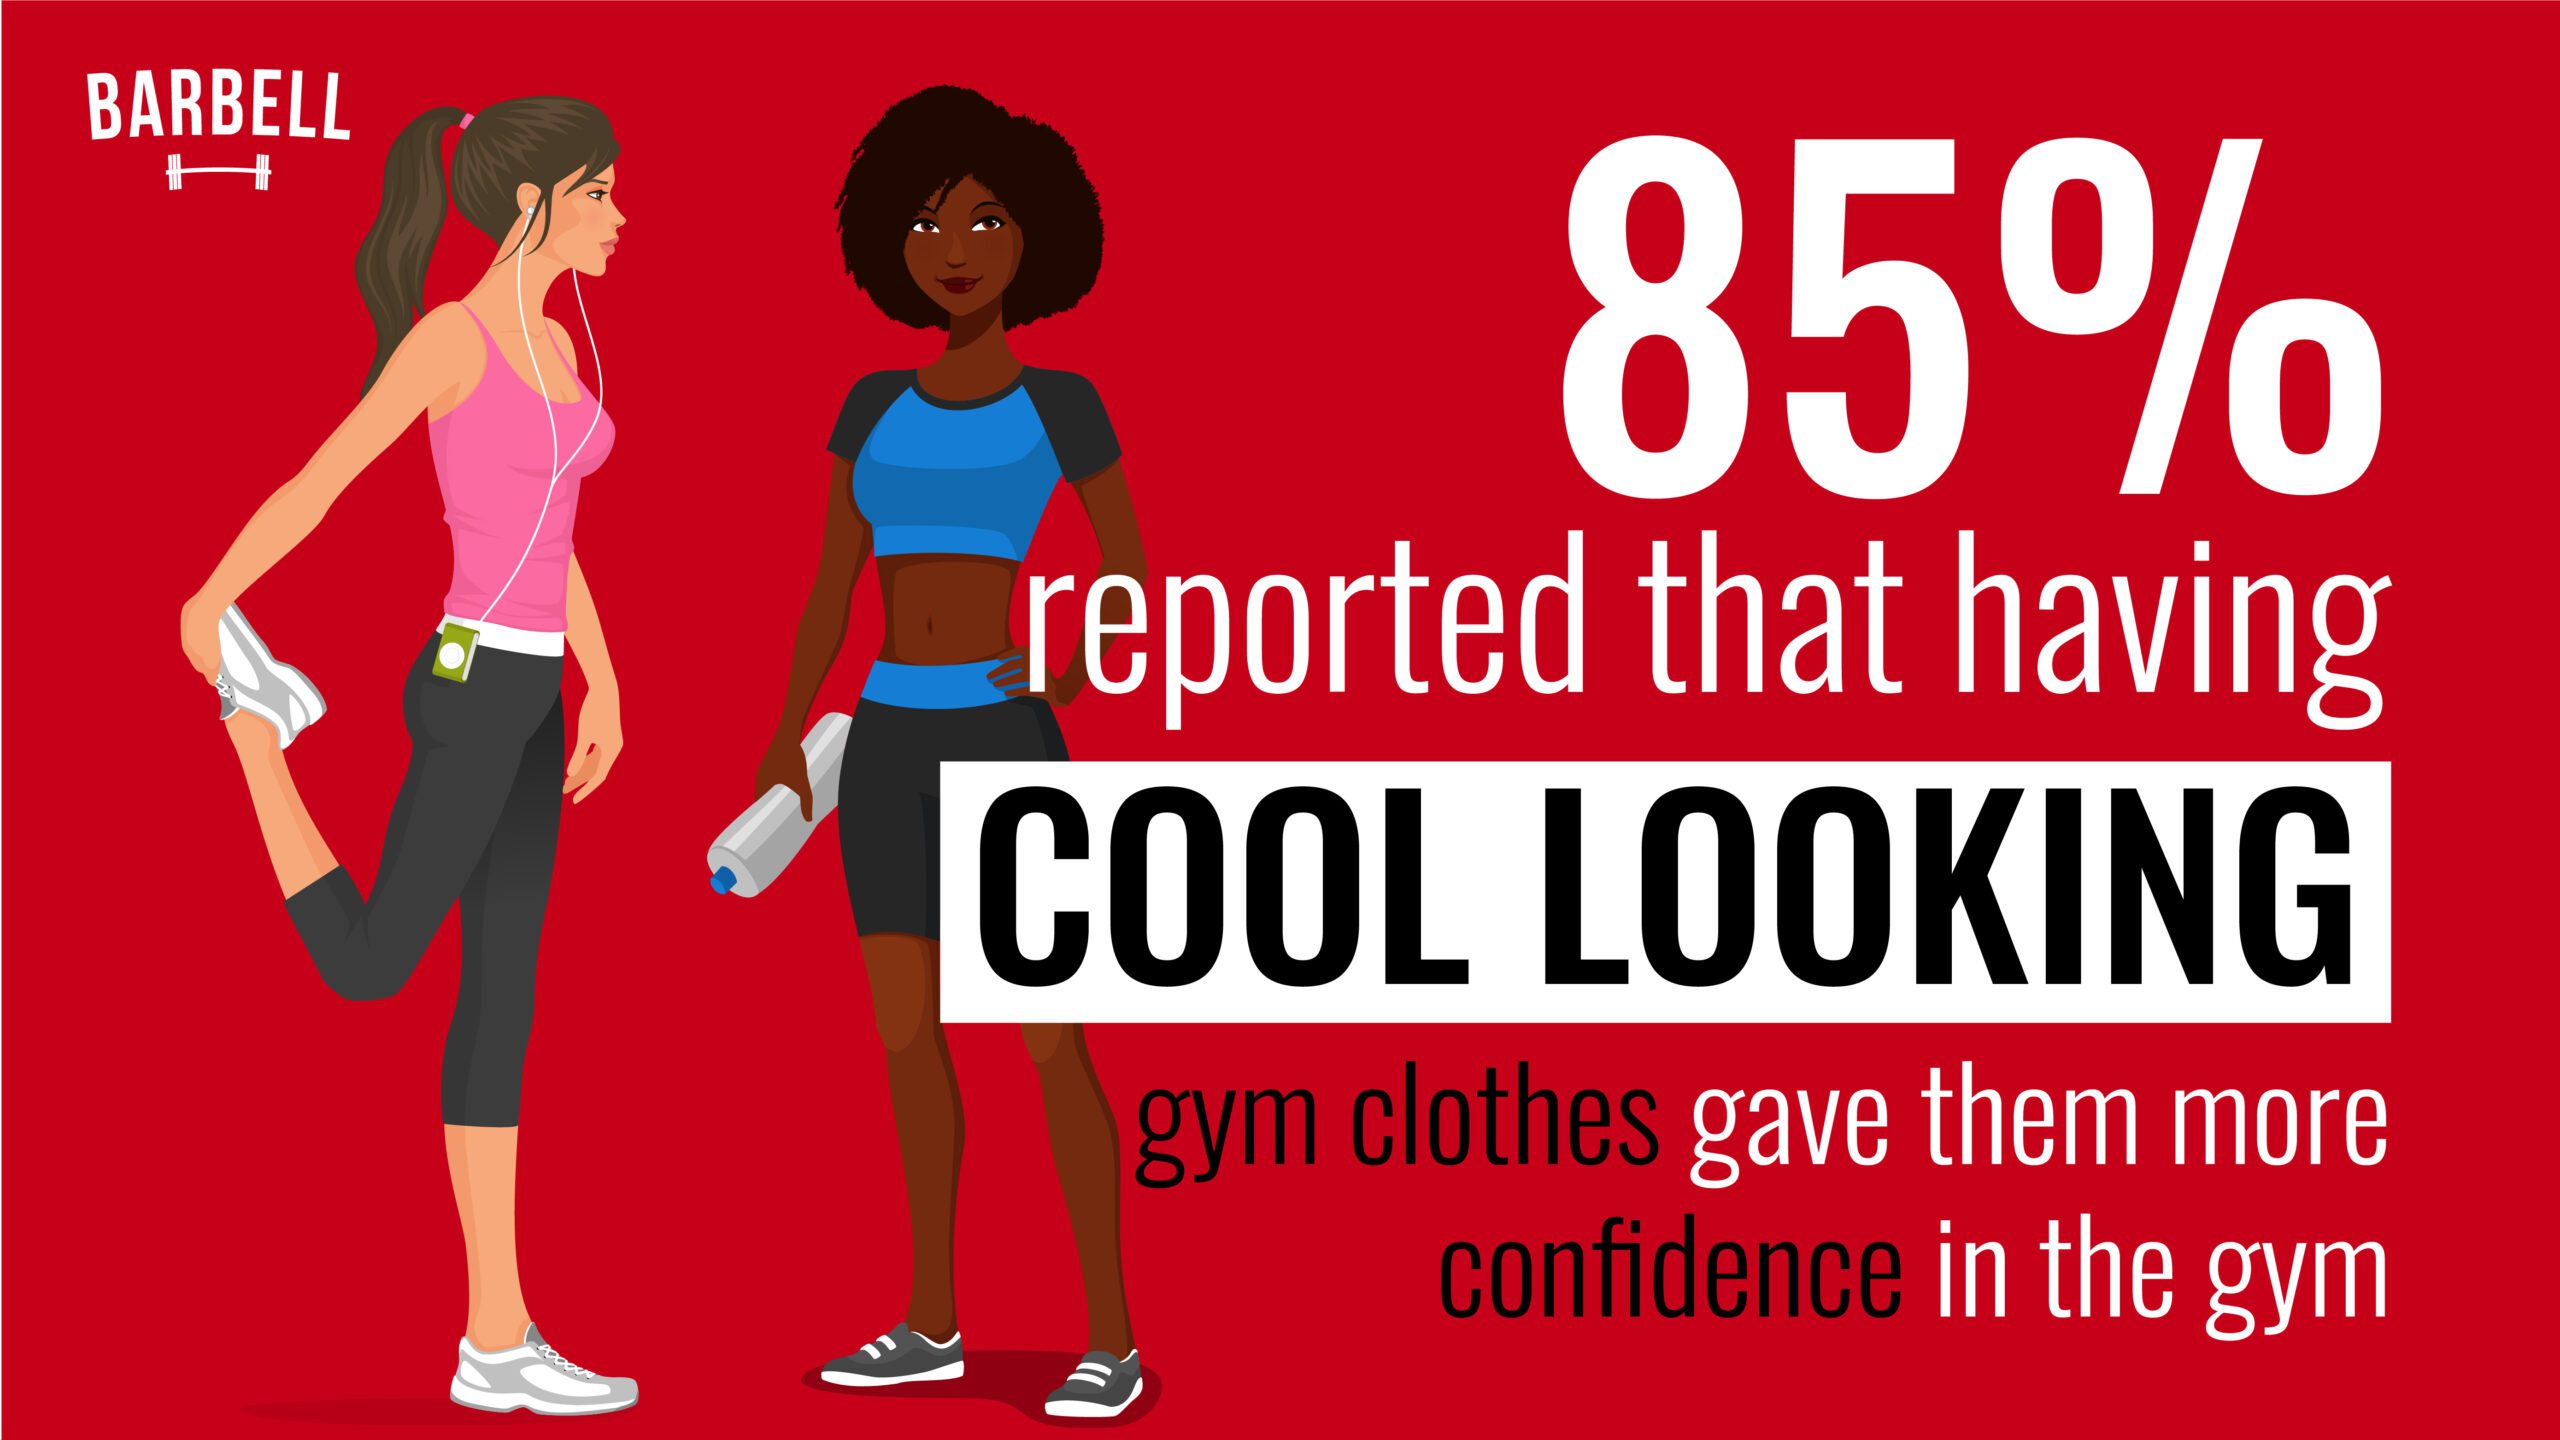 Good news – your workout clothes are becoming a lot more